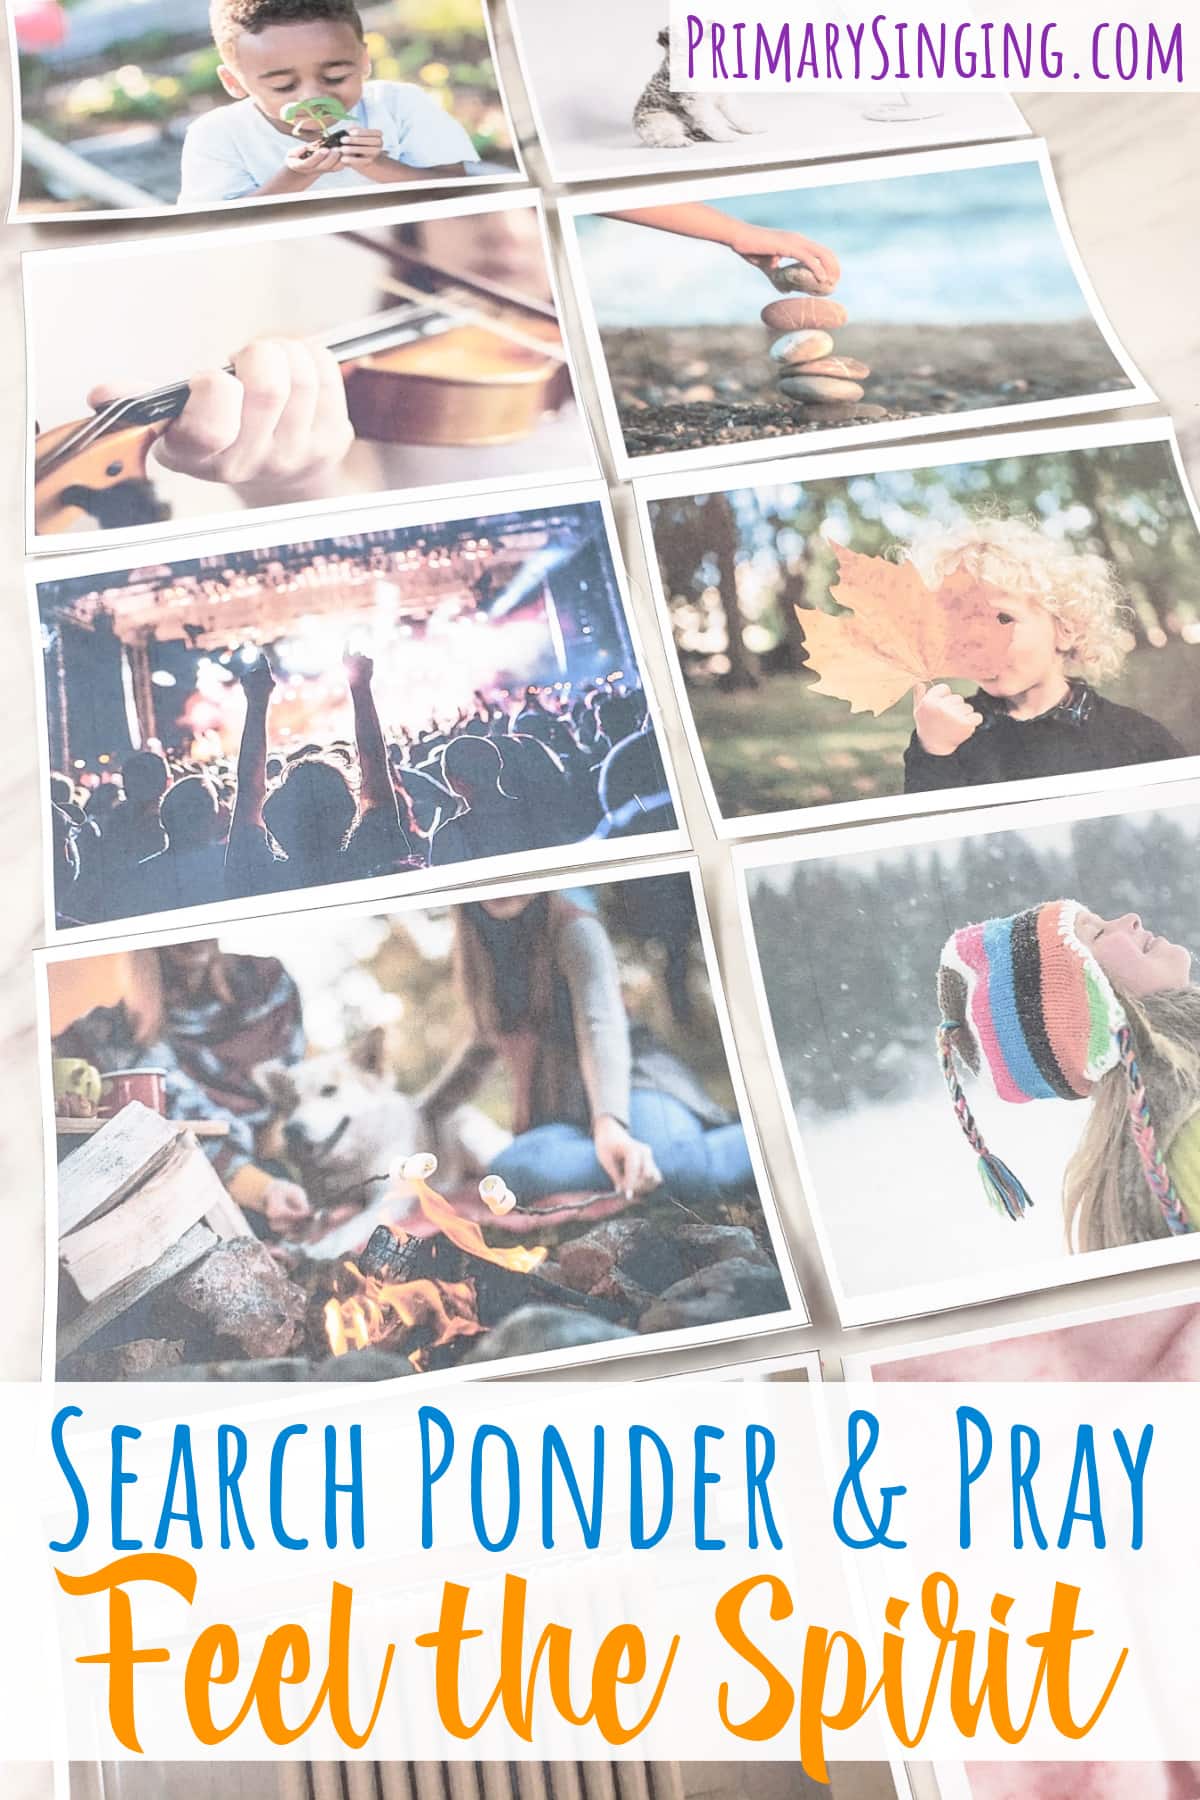 Search Ponder and Pray feel the spirit hands on singing time idea for LDS Primary Music Leaders